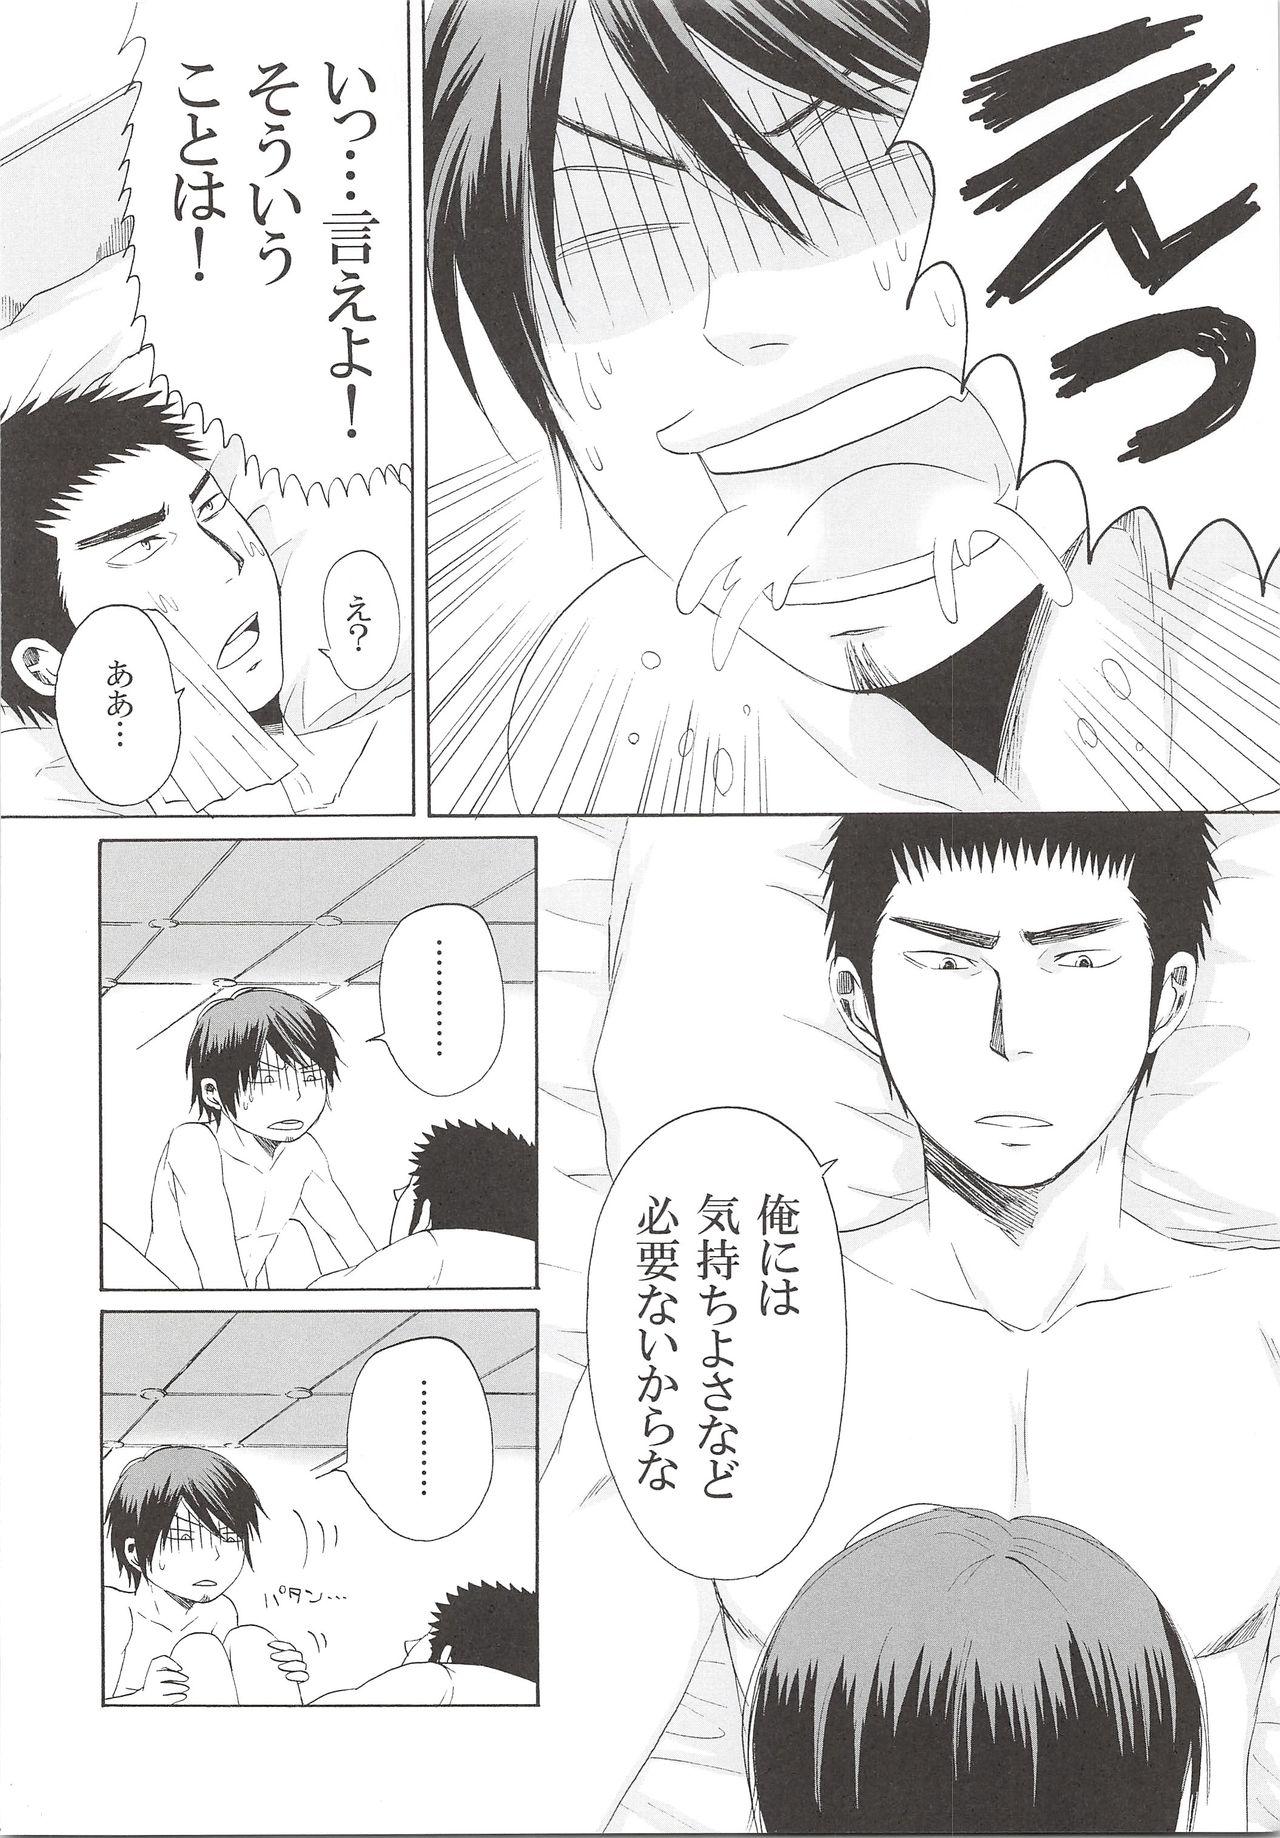 Facials THE LONGEST DAY - Daiya no ace Show - Page 5